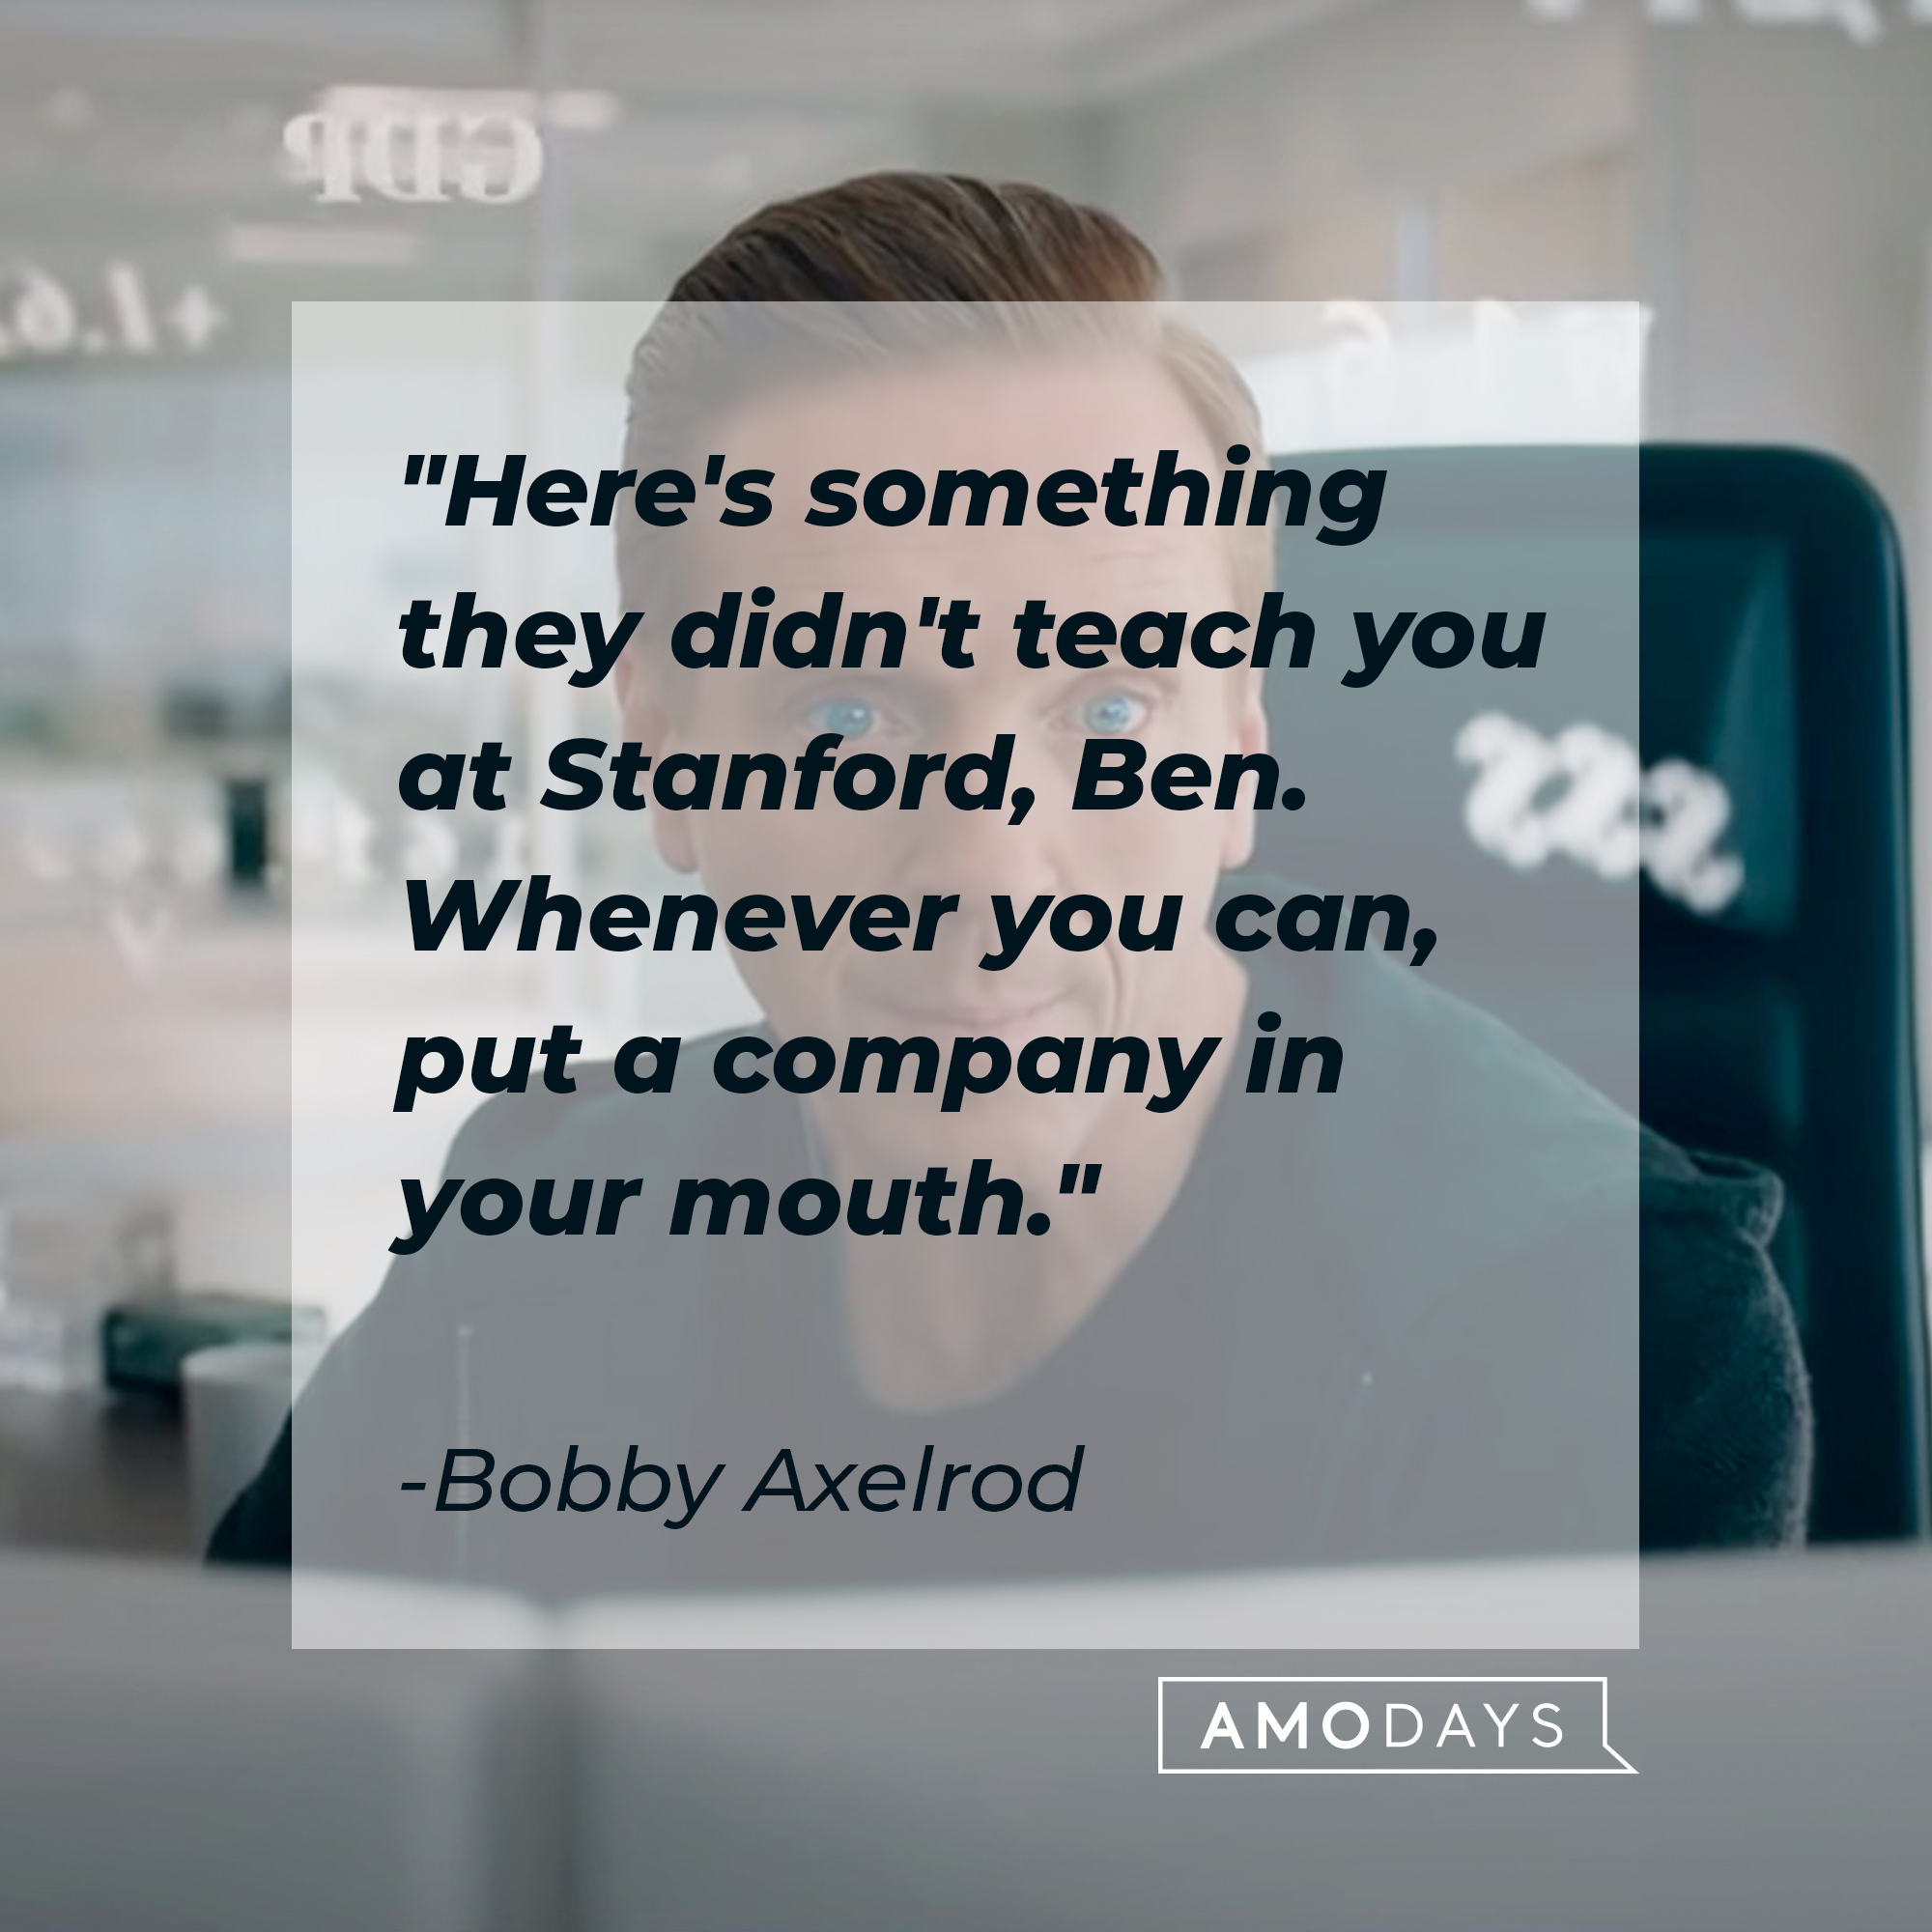 Bobby Axelrod's quote: "Here's something they didn't teach you at Stanford, Ben. Whenever you can, put a company in your mouth." | Source: Youtube.com/BillionsOnShowtime